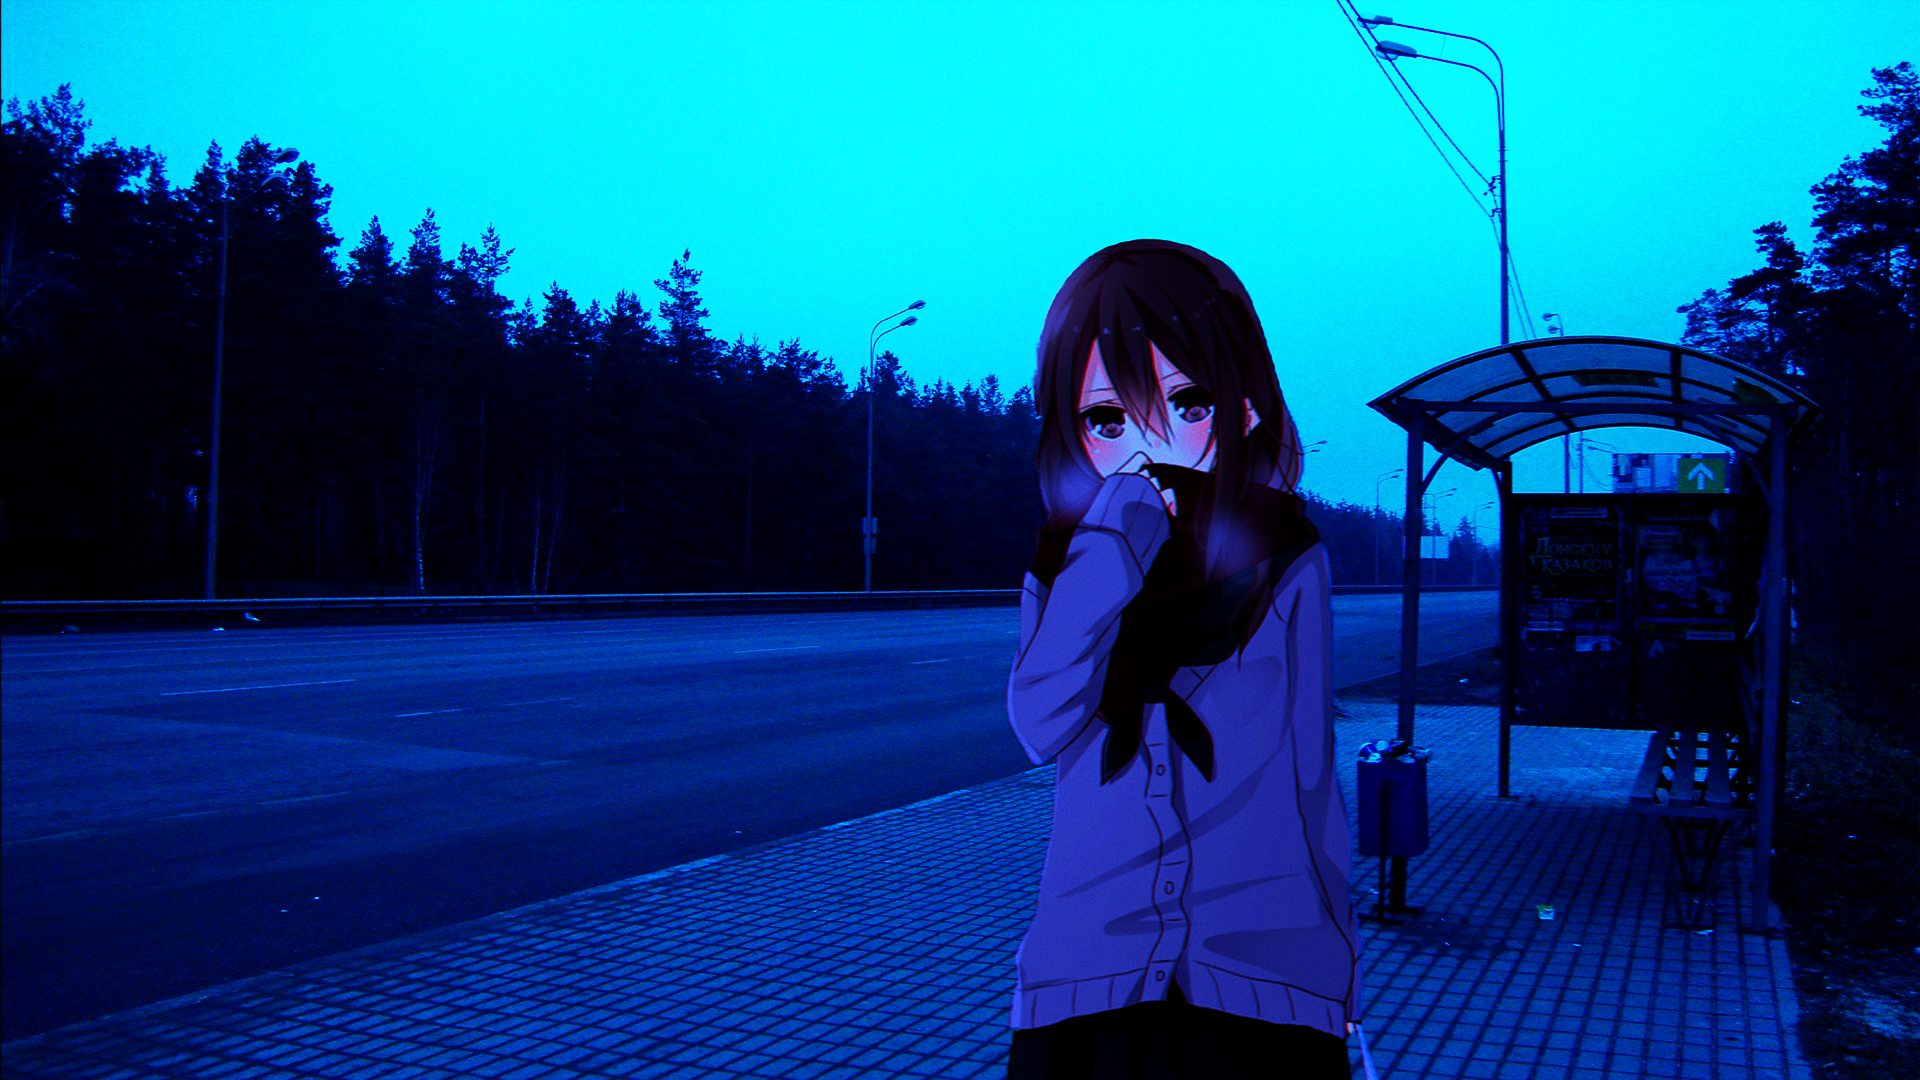 Wallpaper, anime irl, anime girls, bus stop, cold, empty, Russia 1920x1080